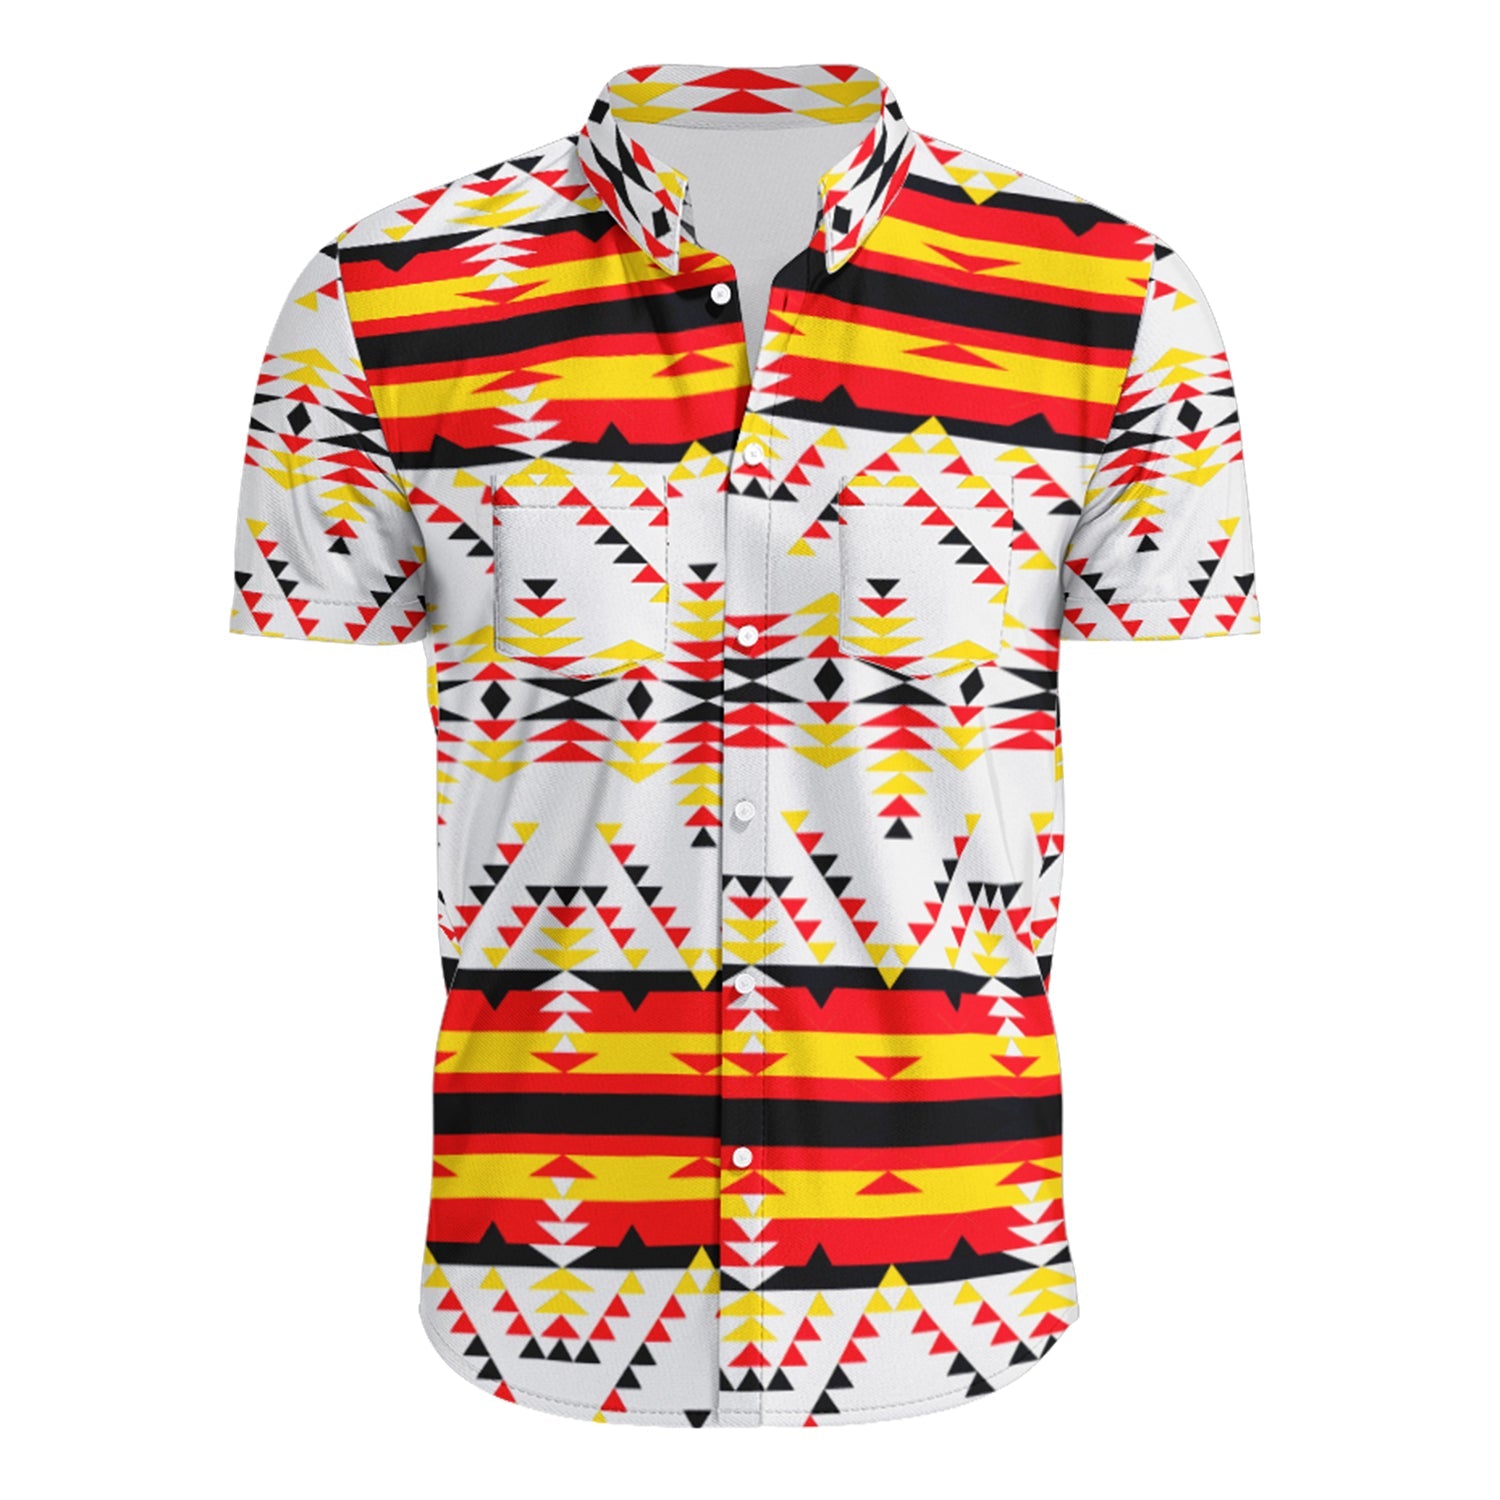 Men's Hawaiian-Style Button Up Shirt - Vision of Peace Directions